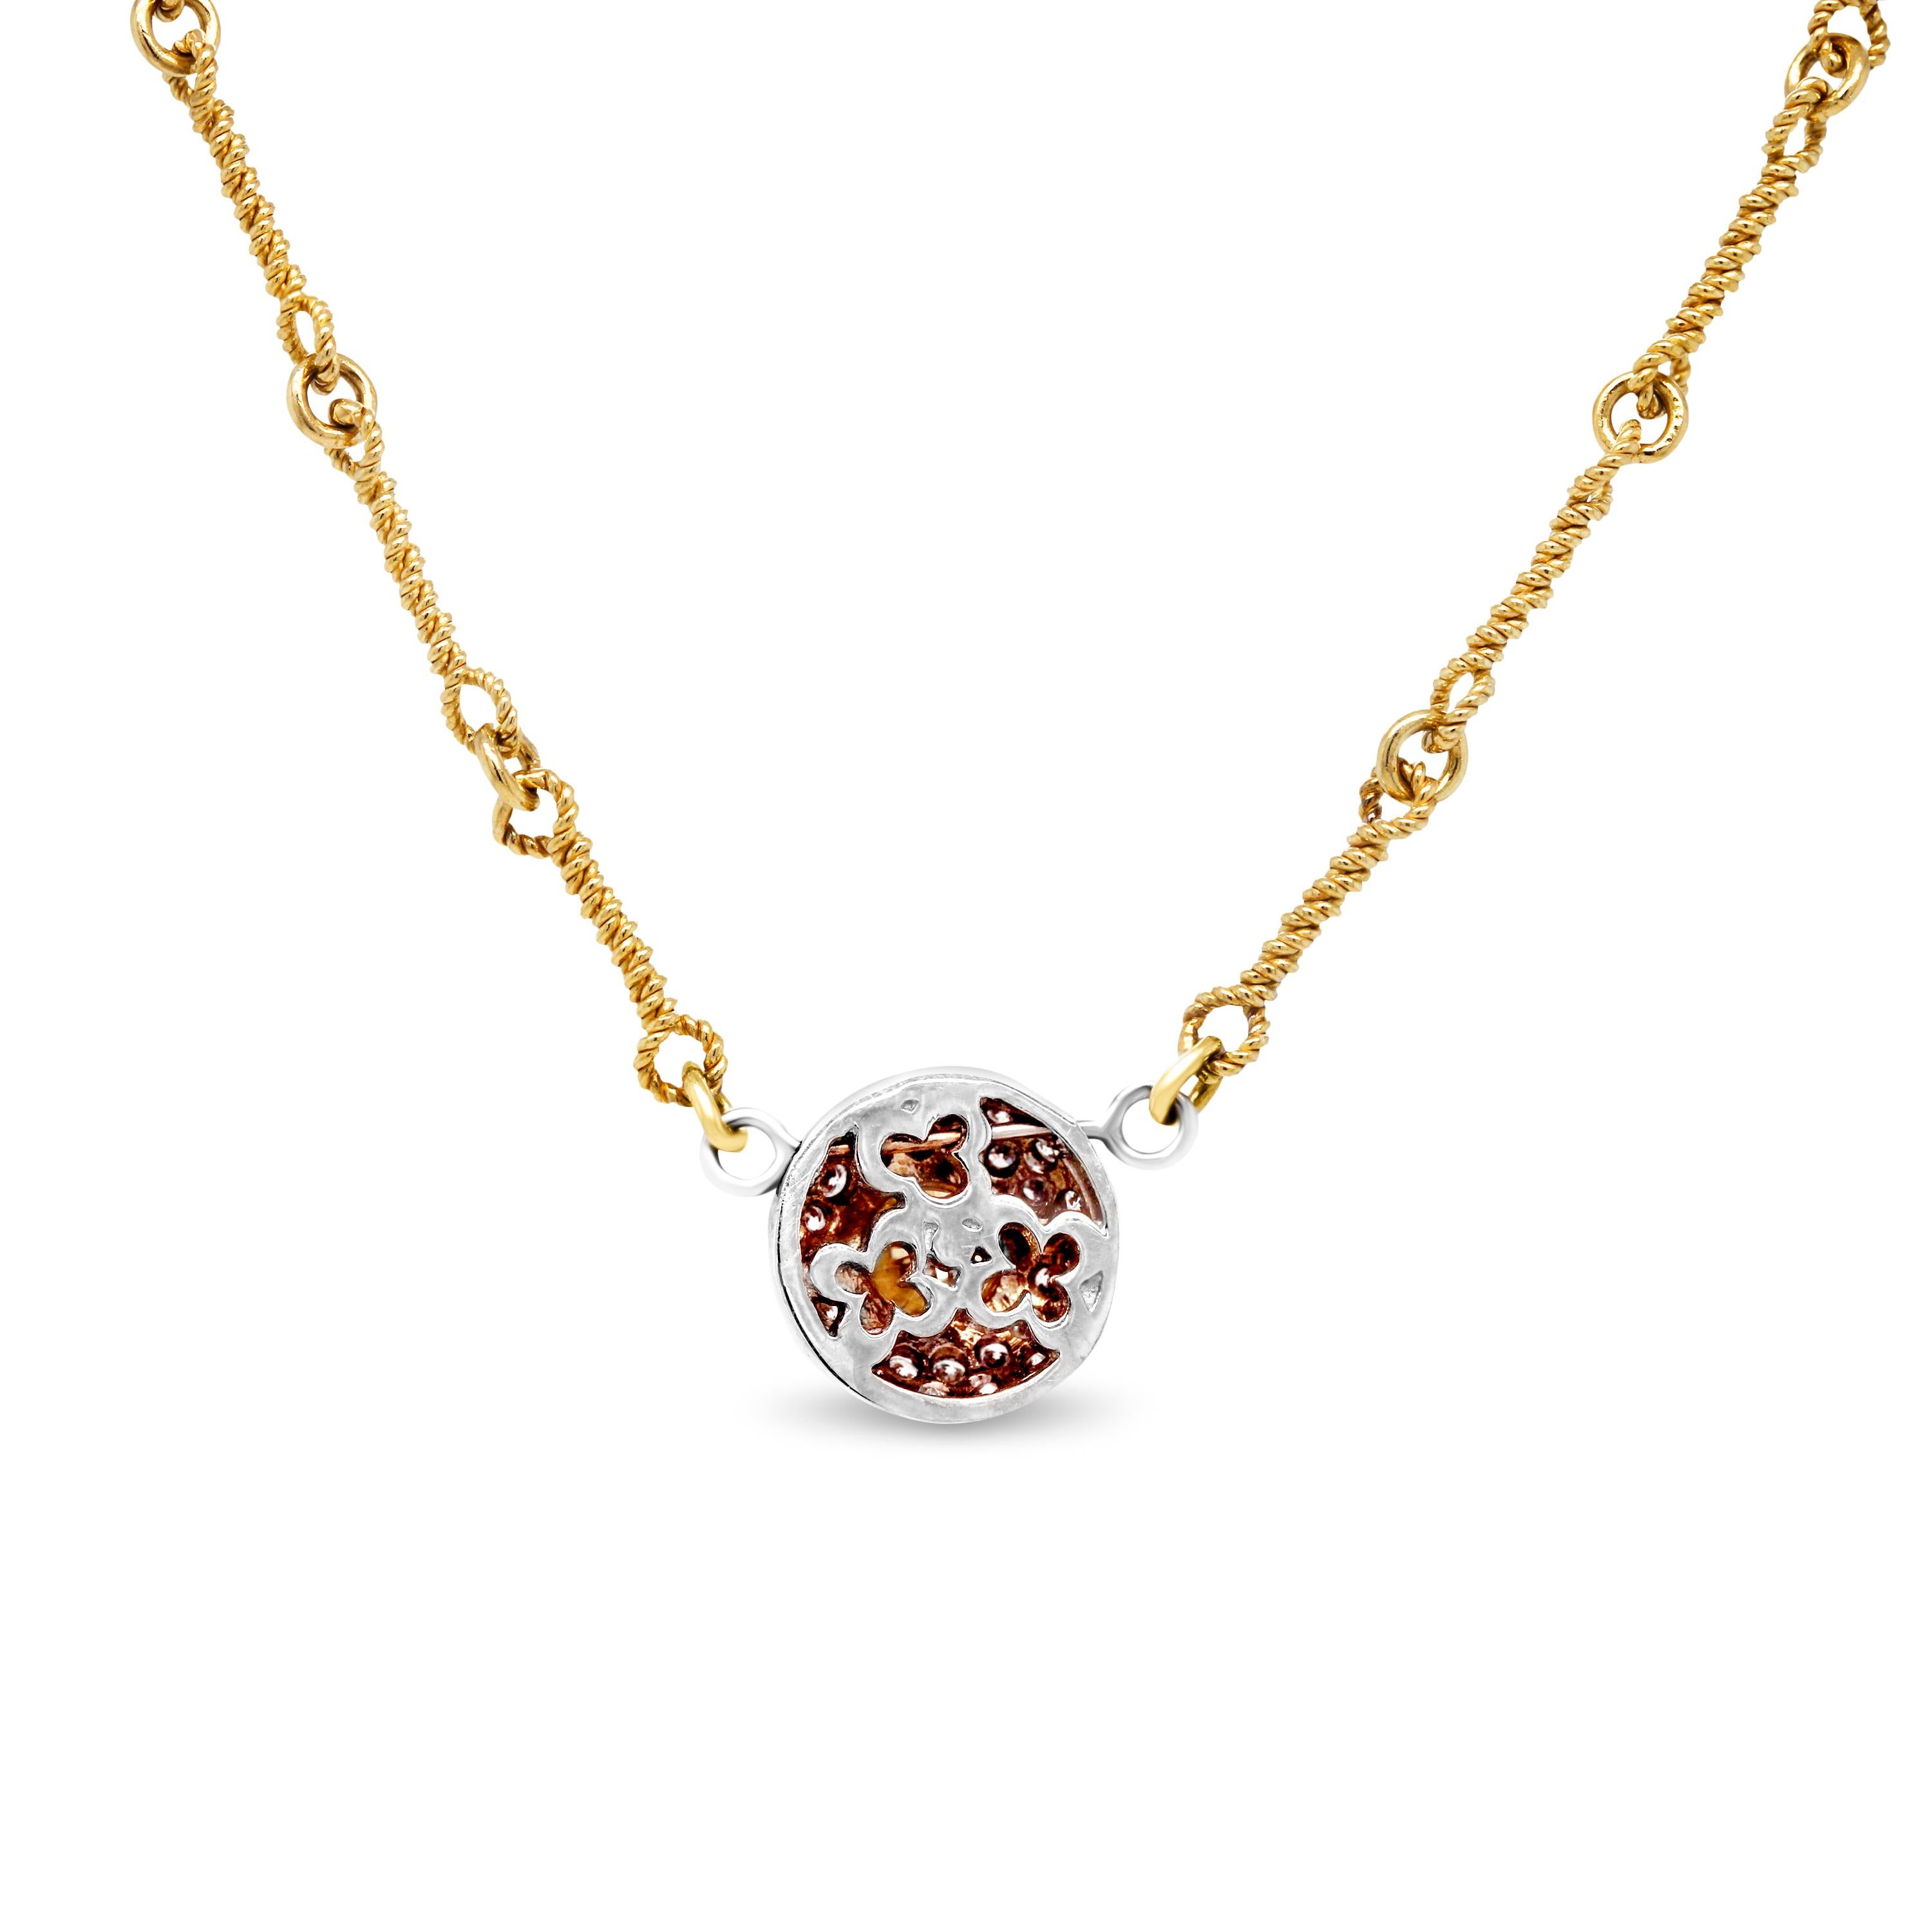 Stambolian 18K Gold Yellow White Diamond Circle Pendant Chain Necklace

Handmade chain is used which is done entirely by gold twisted wires all put together one-by-one

0.50 carat yellow diamond center is surrounded by 0.50 carat G color, VS clarity